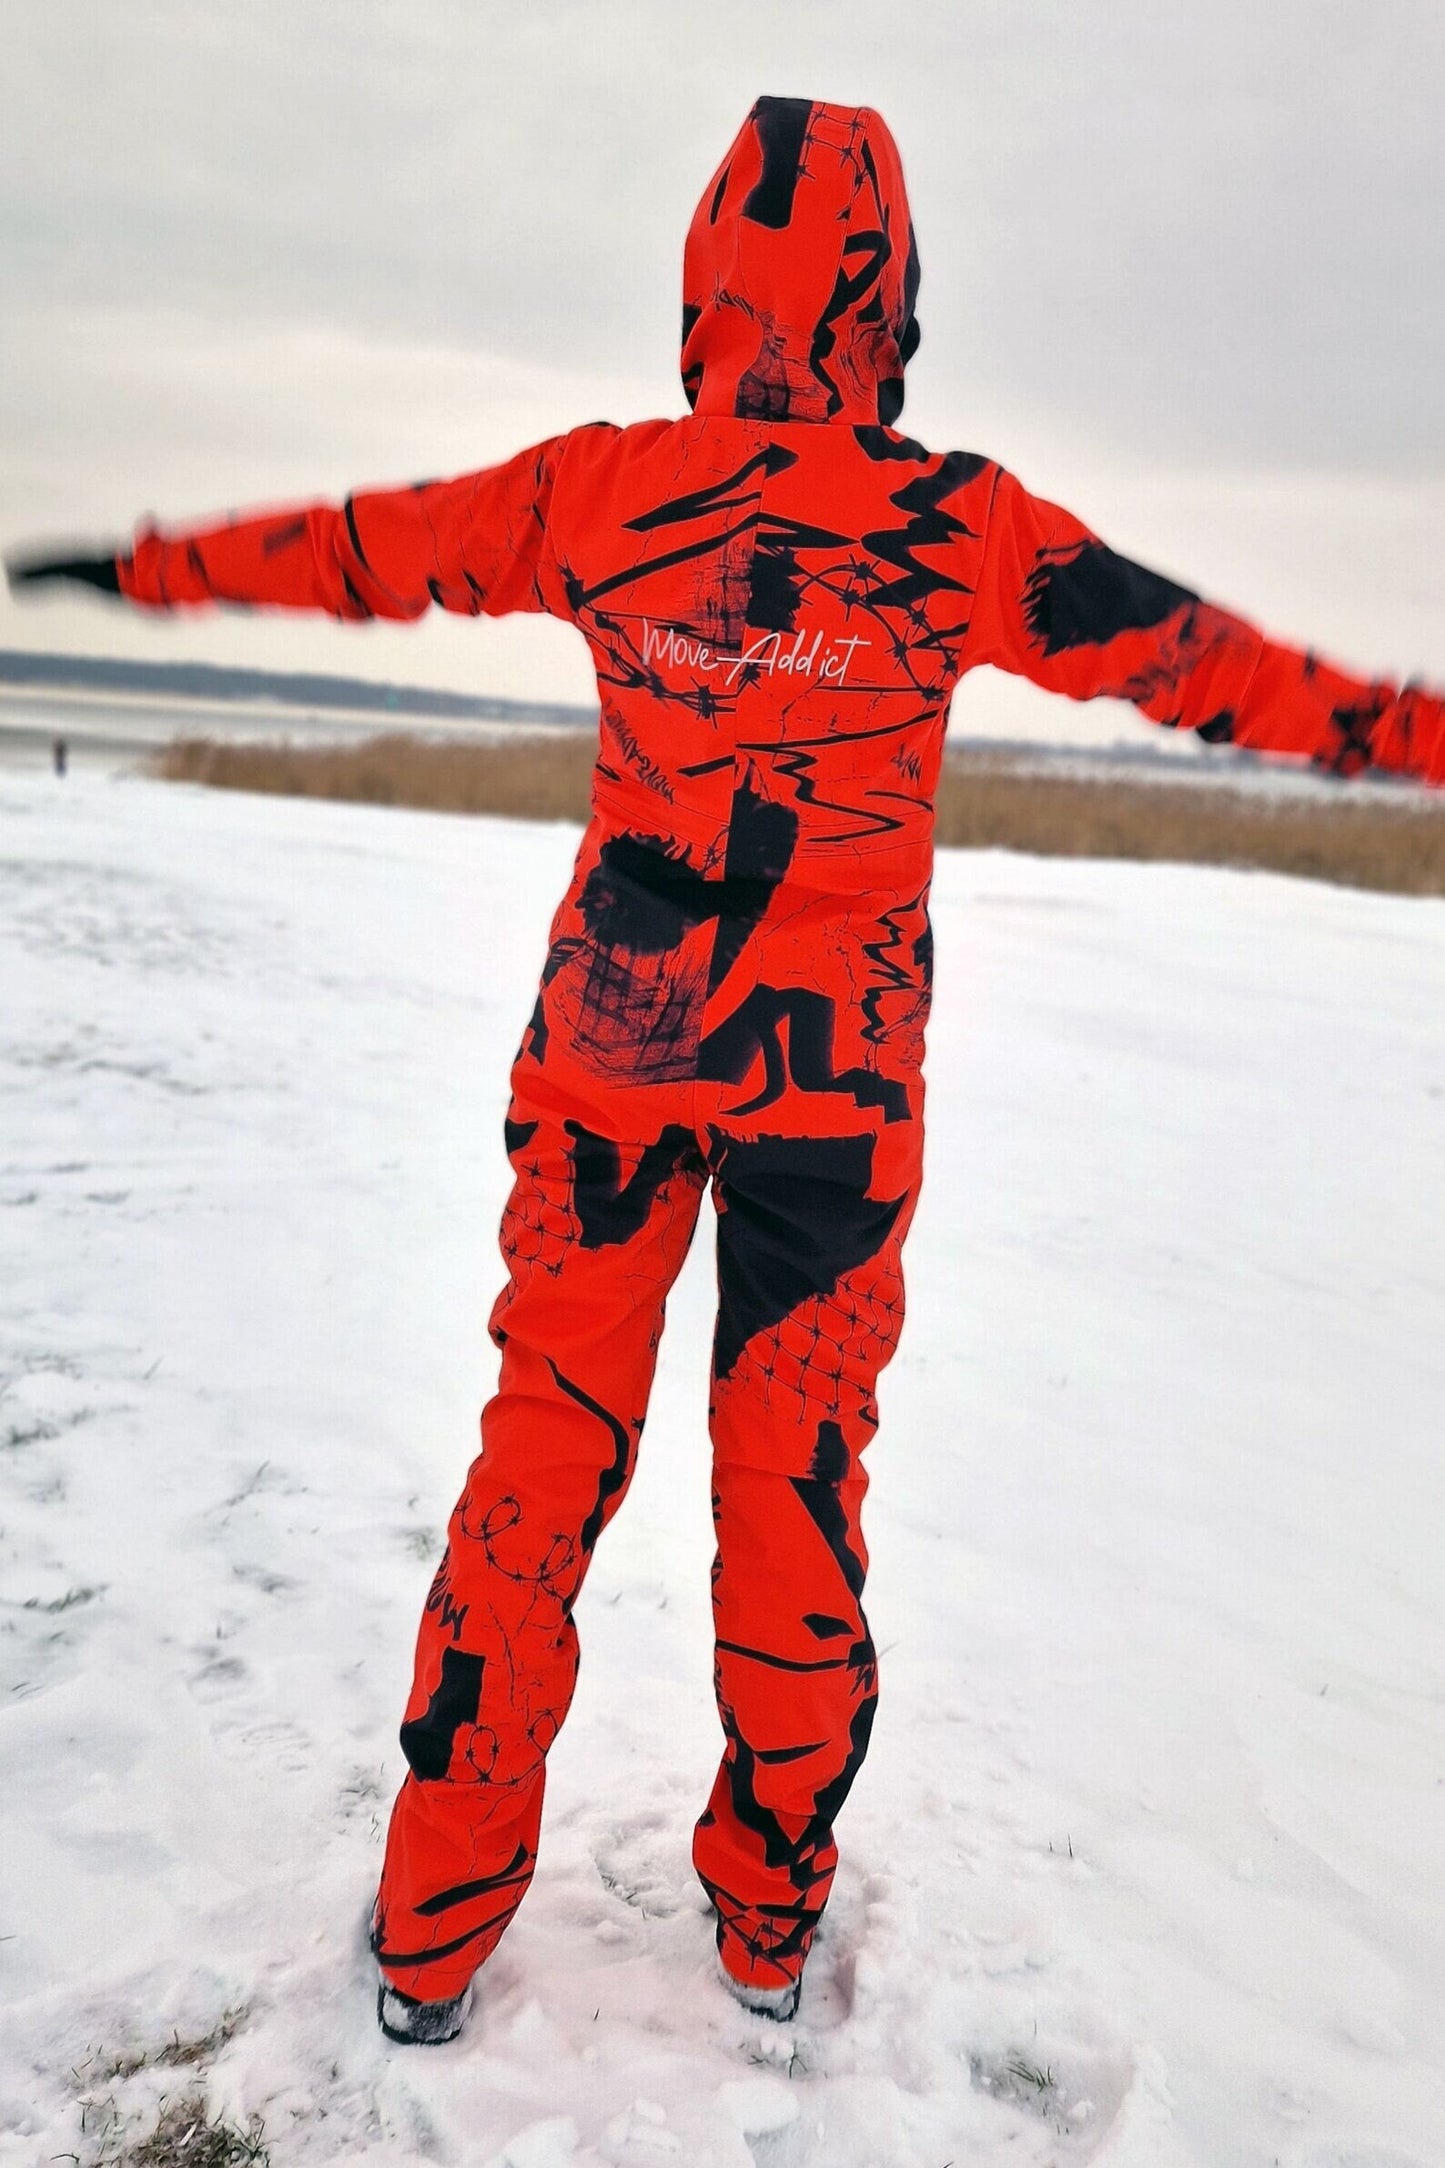 SET: Red Winter Ski Jumpsuit, Snowboard Clothes, Snowboard suit, Skiing Overall, Women Mountain's clothes, Winter Thermal underwear